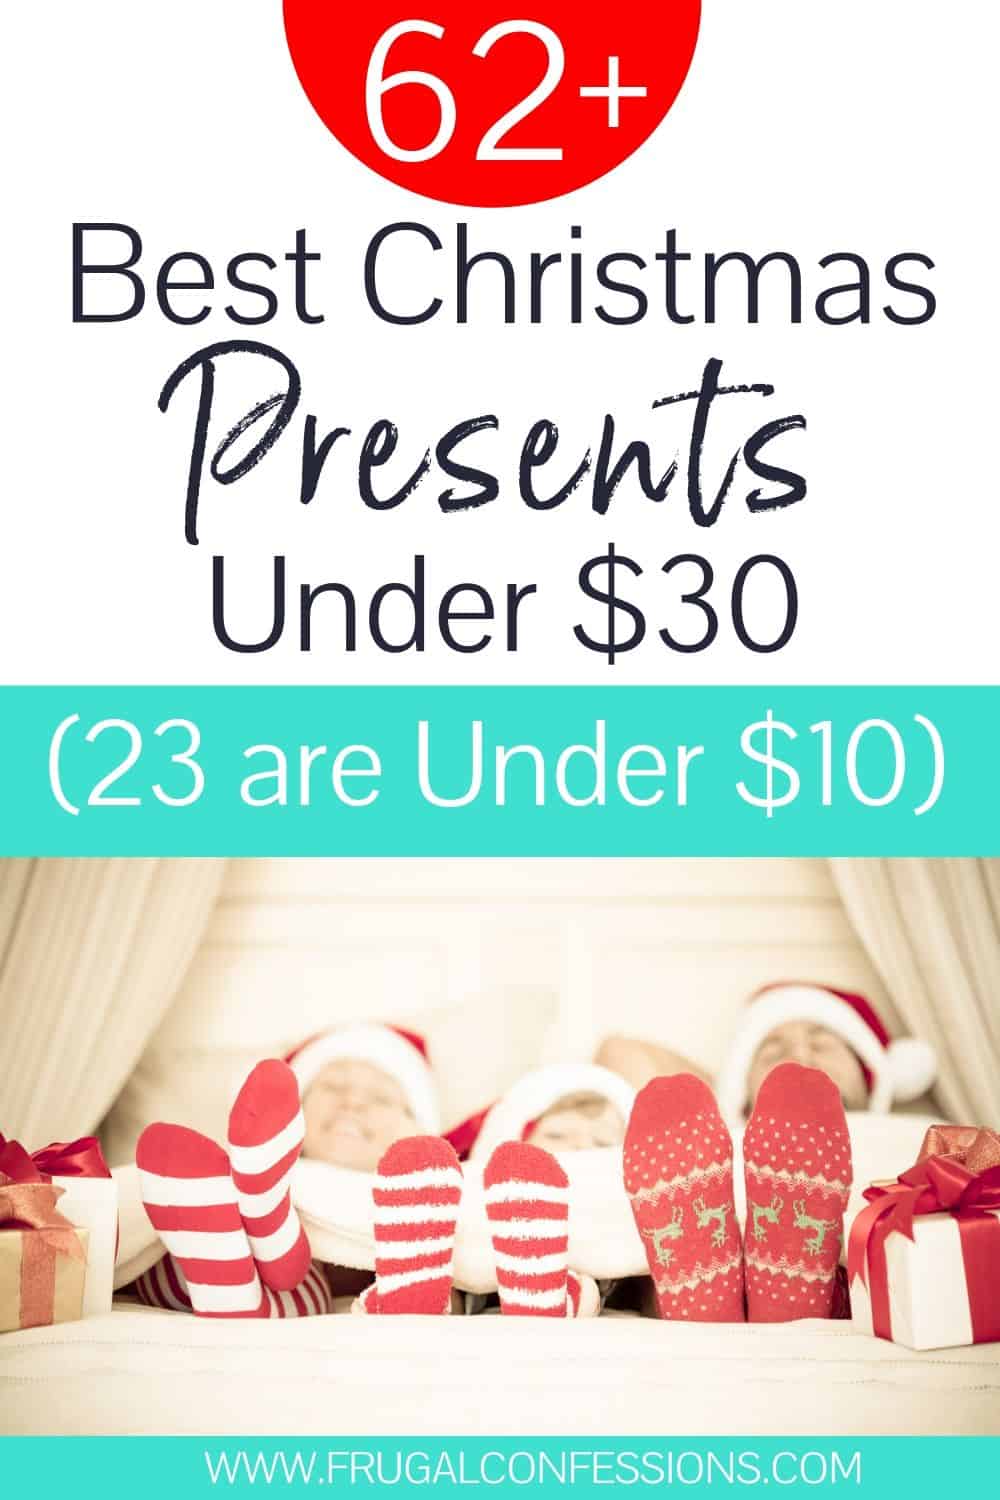 family laying down with Christmas socks on, text overlay "62+ best Christmas presents under $30, 23 are under $10)